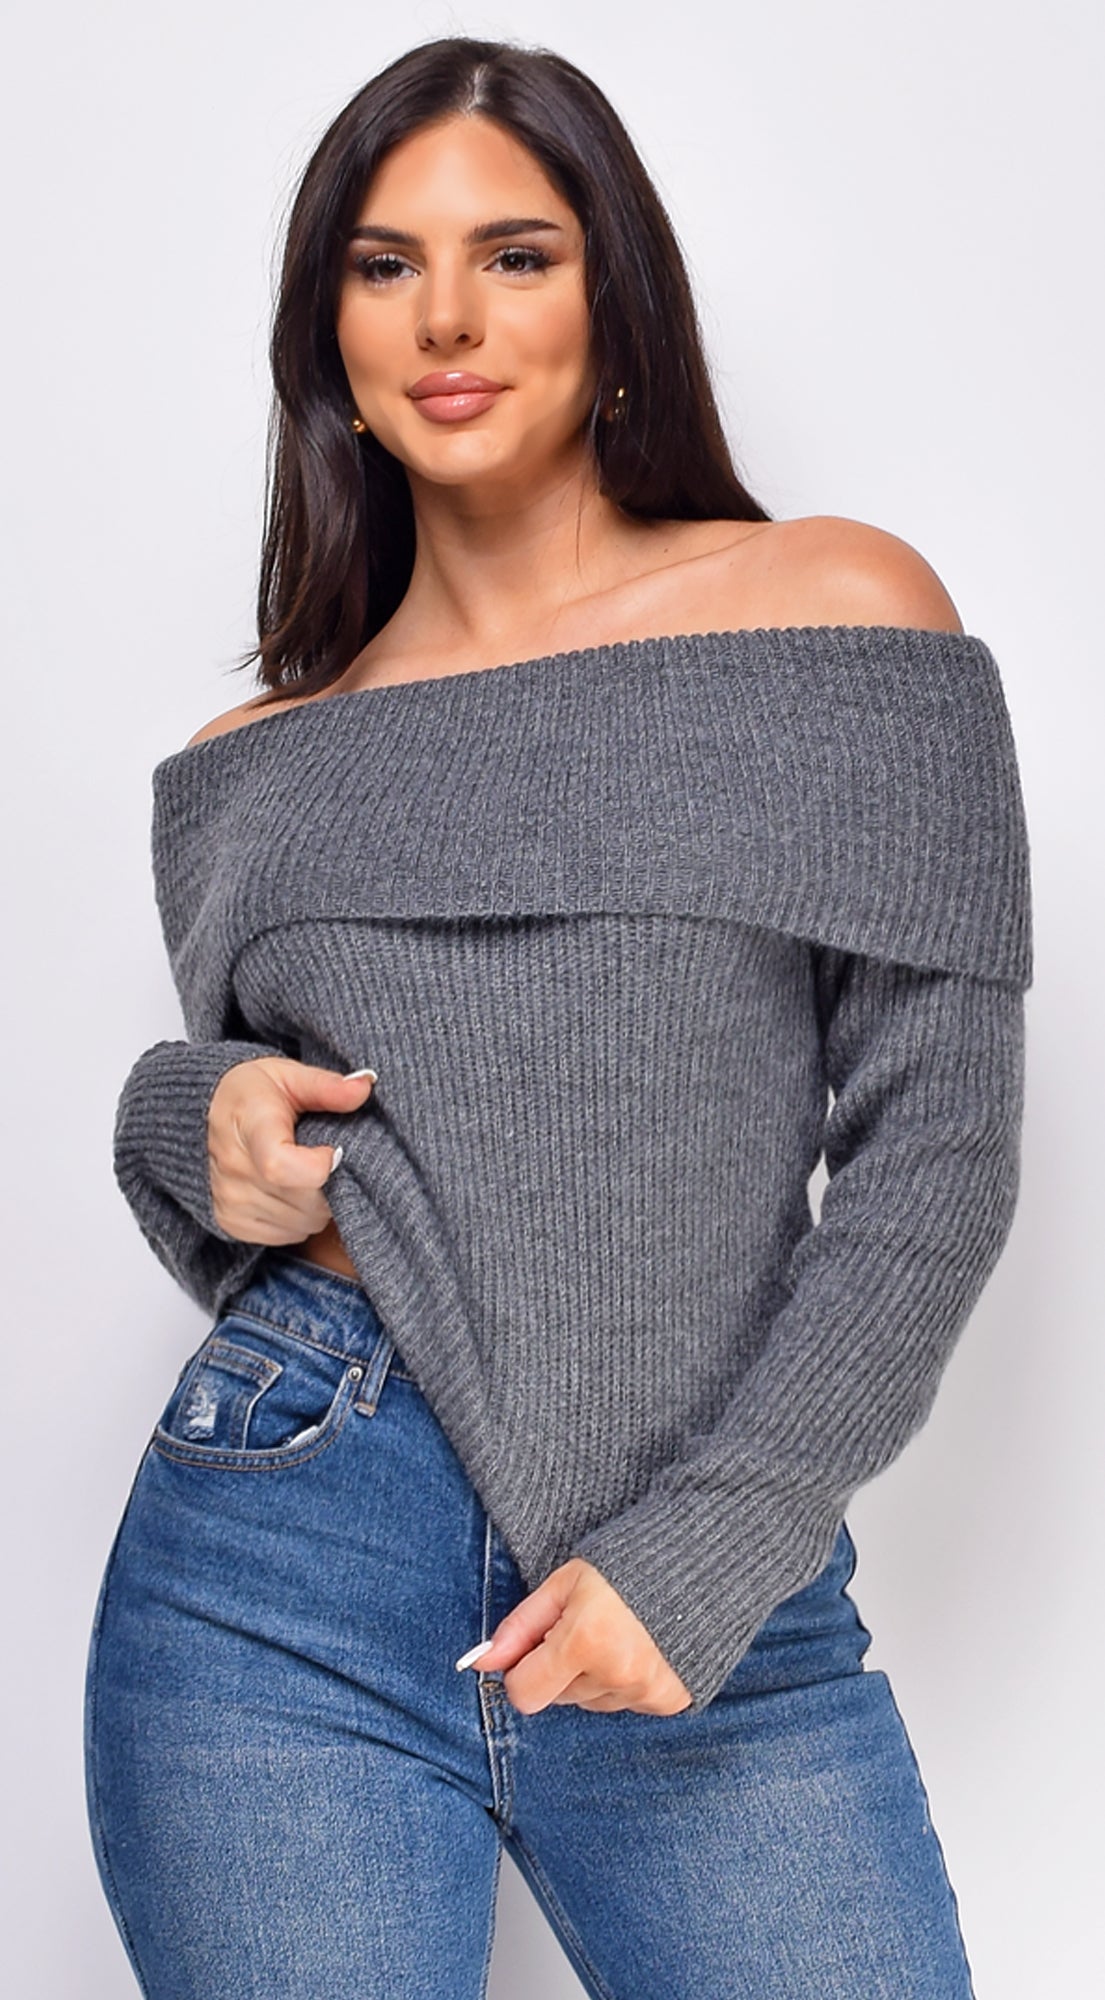 Fayola Charcoal Gray Off Shoulder Sweater Top